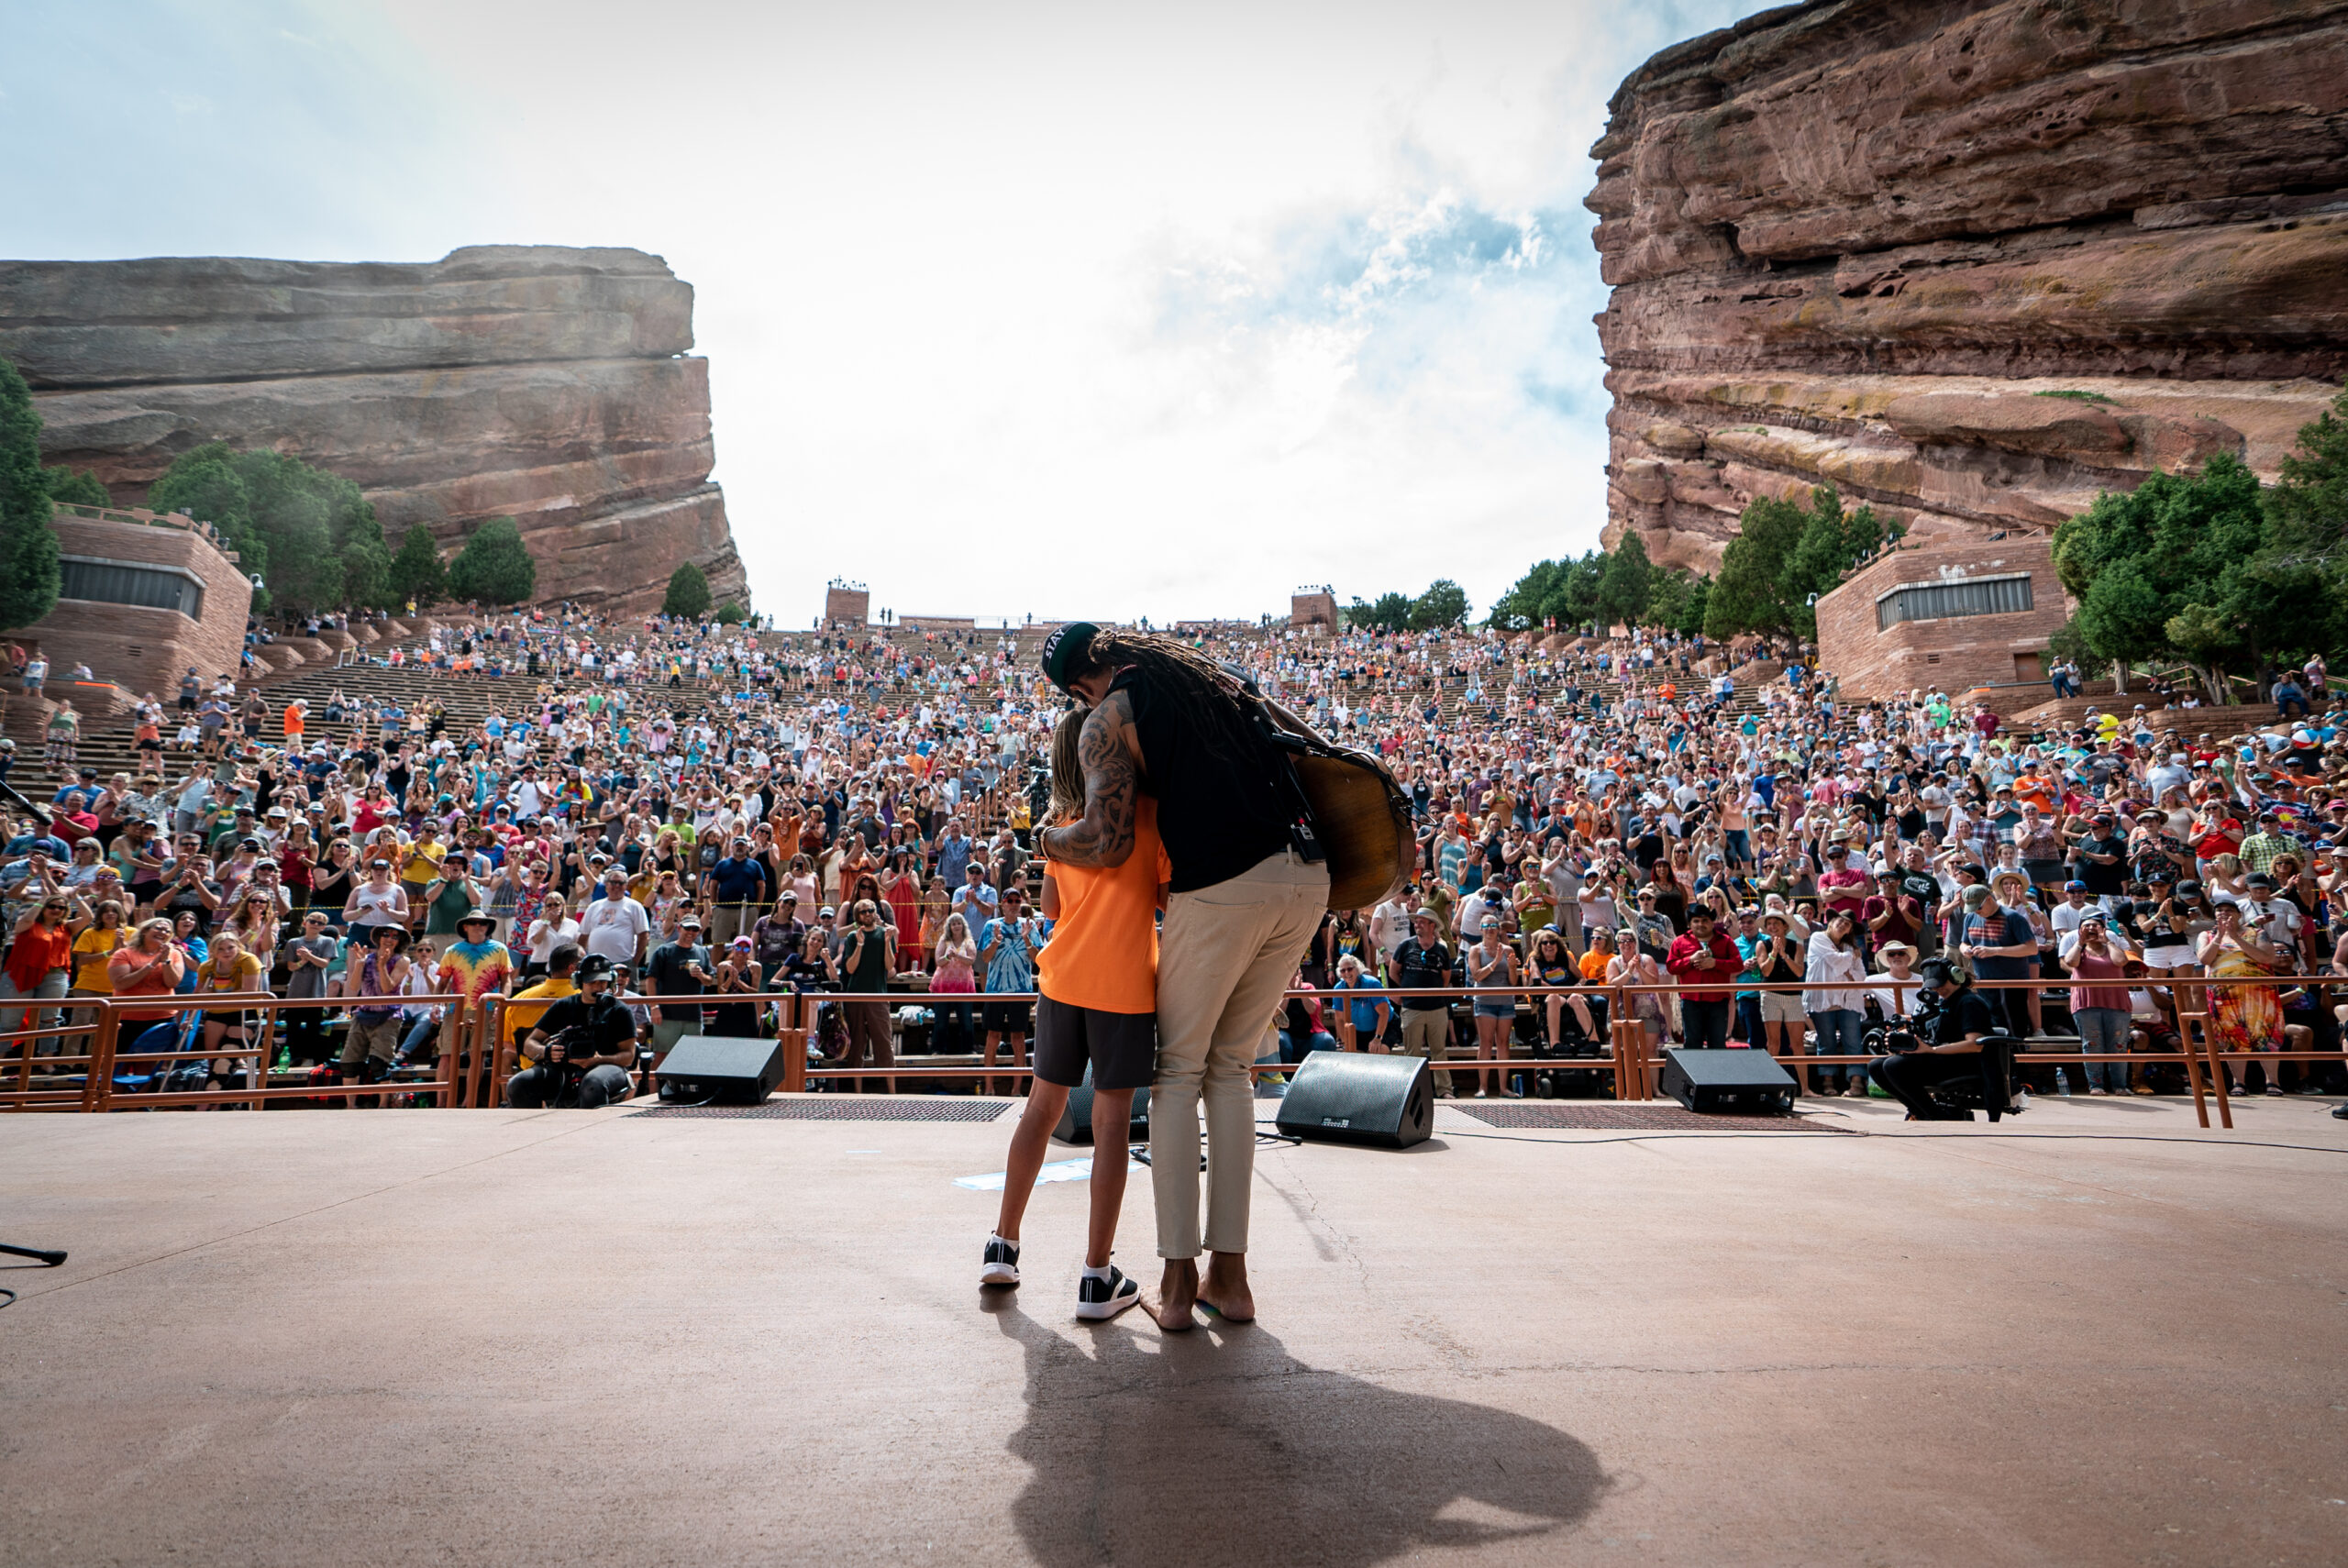 Michael Franti & Spearhead at Red Rocks On Location Music